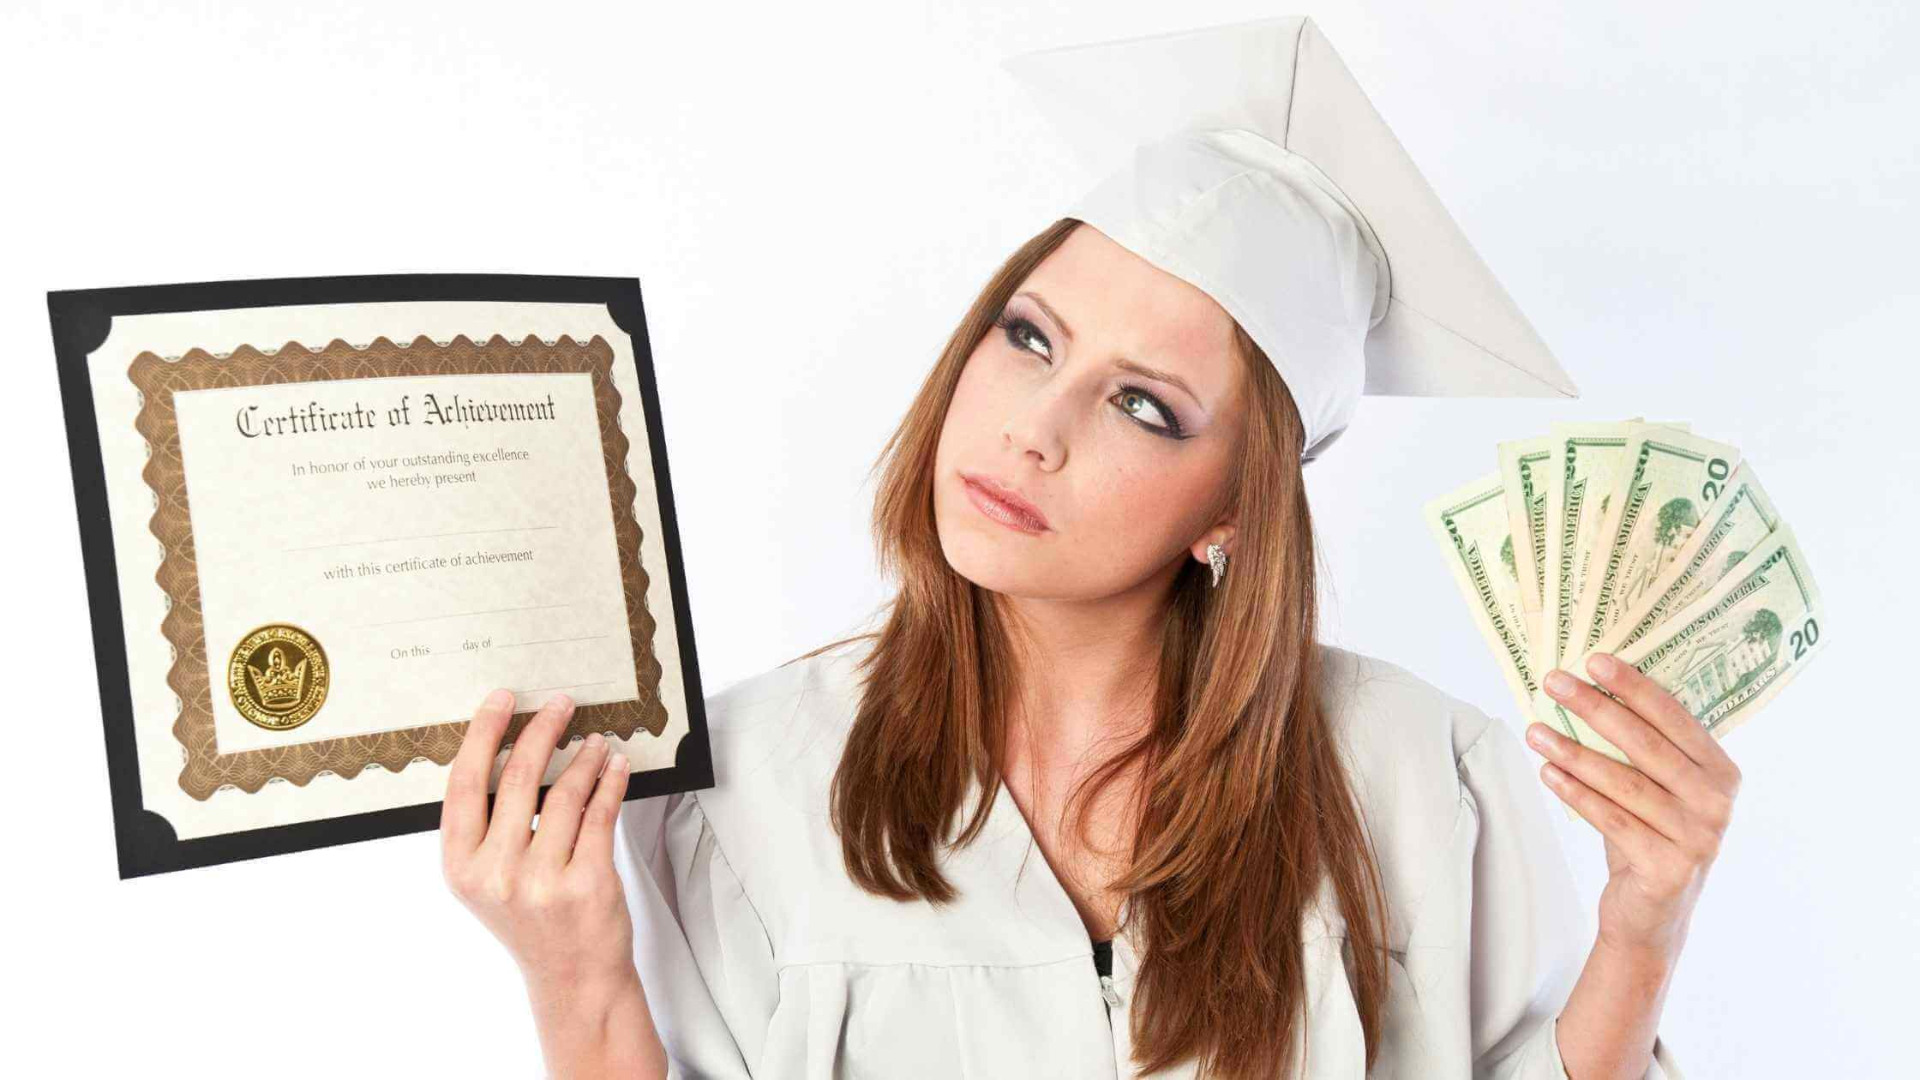 beautiful ginger graduate in white cap and gown holding her certificate and a pile of cash showing the true cost of a degree